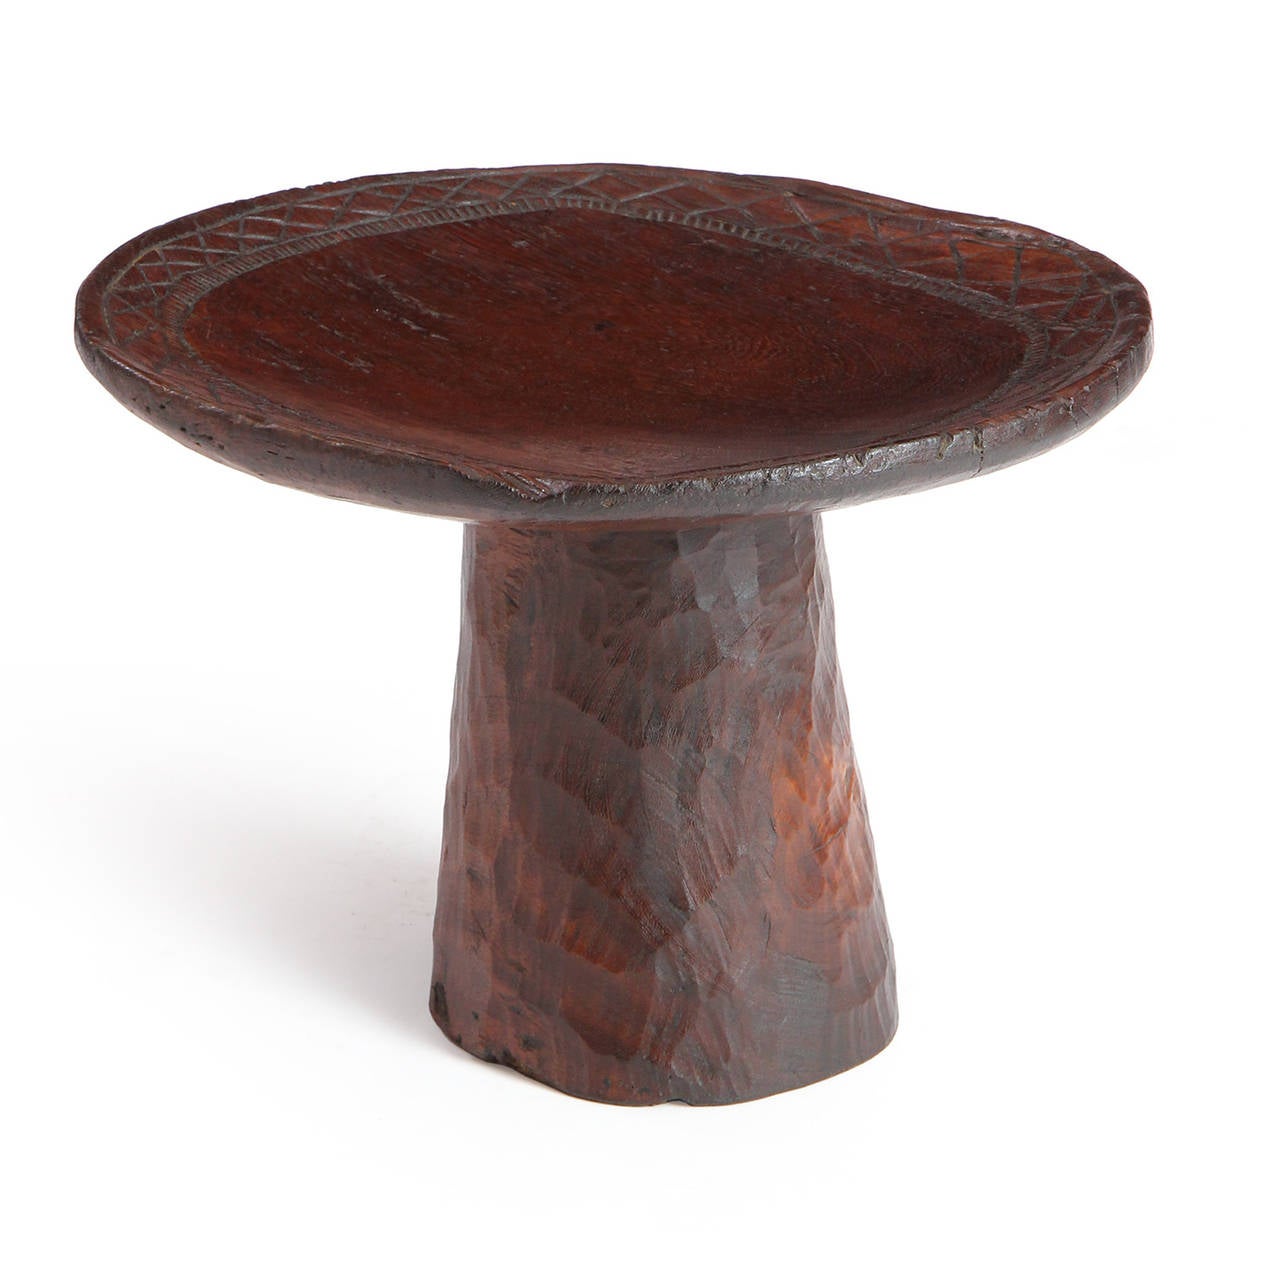 A magnificent, soulful and uncommon diminutive table or pedestal carved from a single block of richly toned African hardwood and having incised cris-cross patterning around the perimeter.